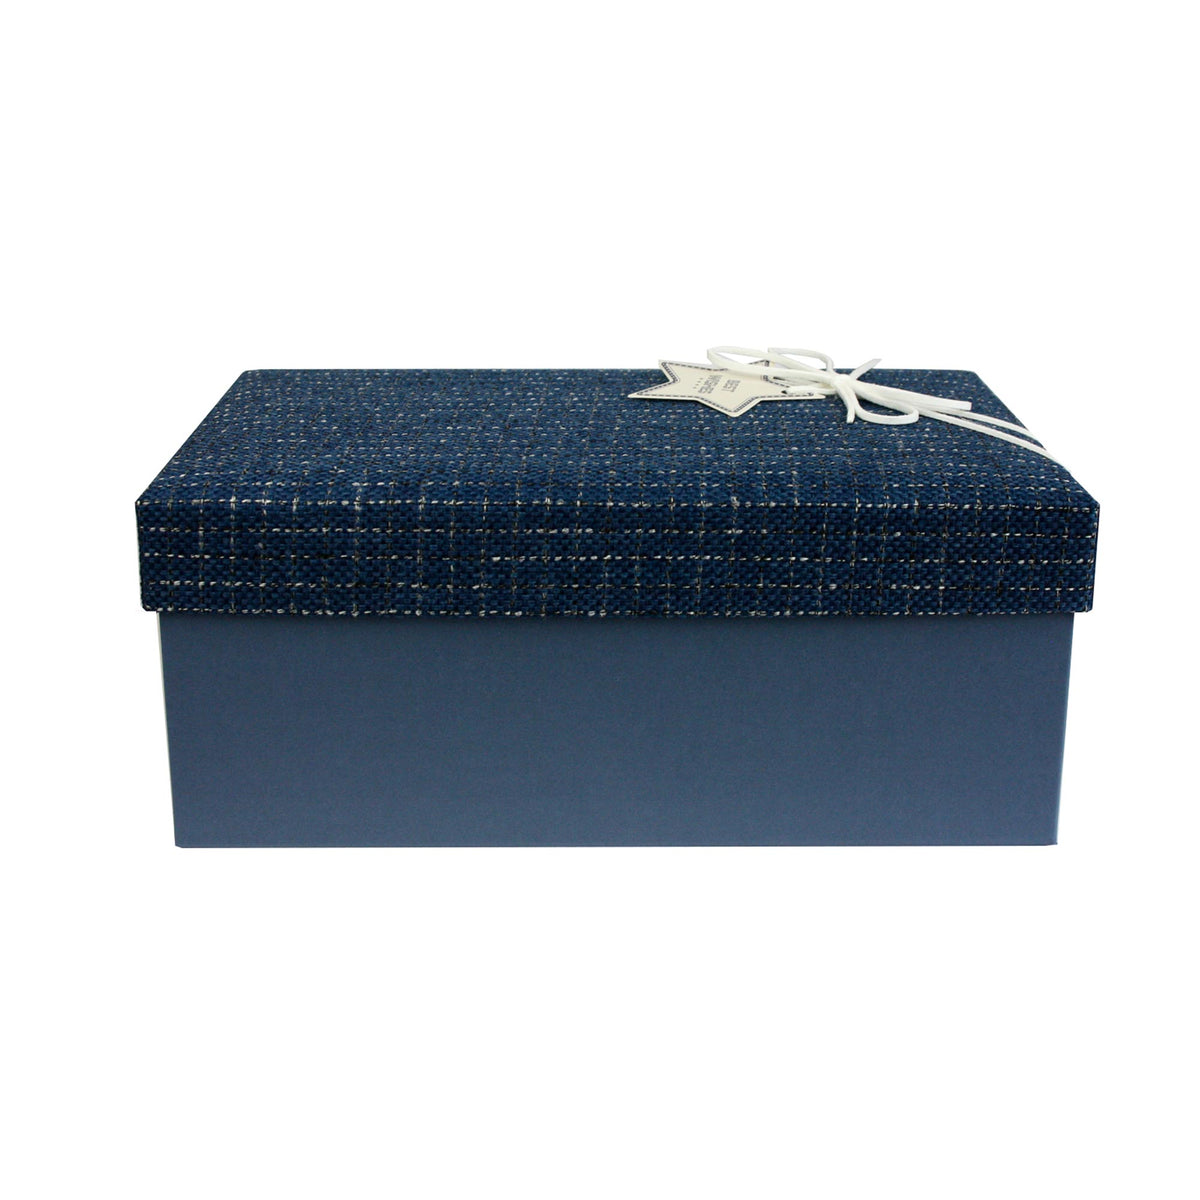 Luxurious gift box perfect for birthdays and special occasions